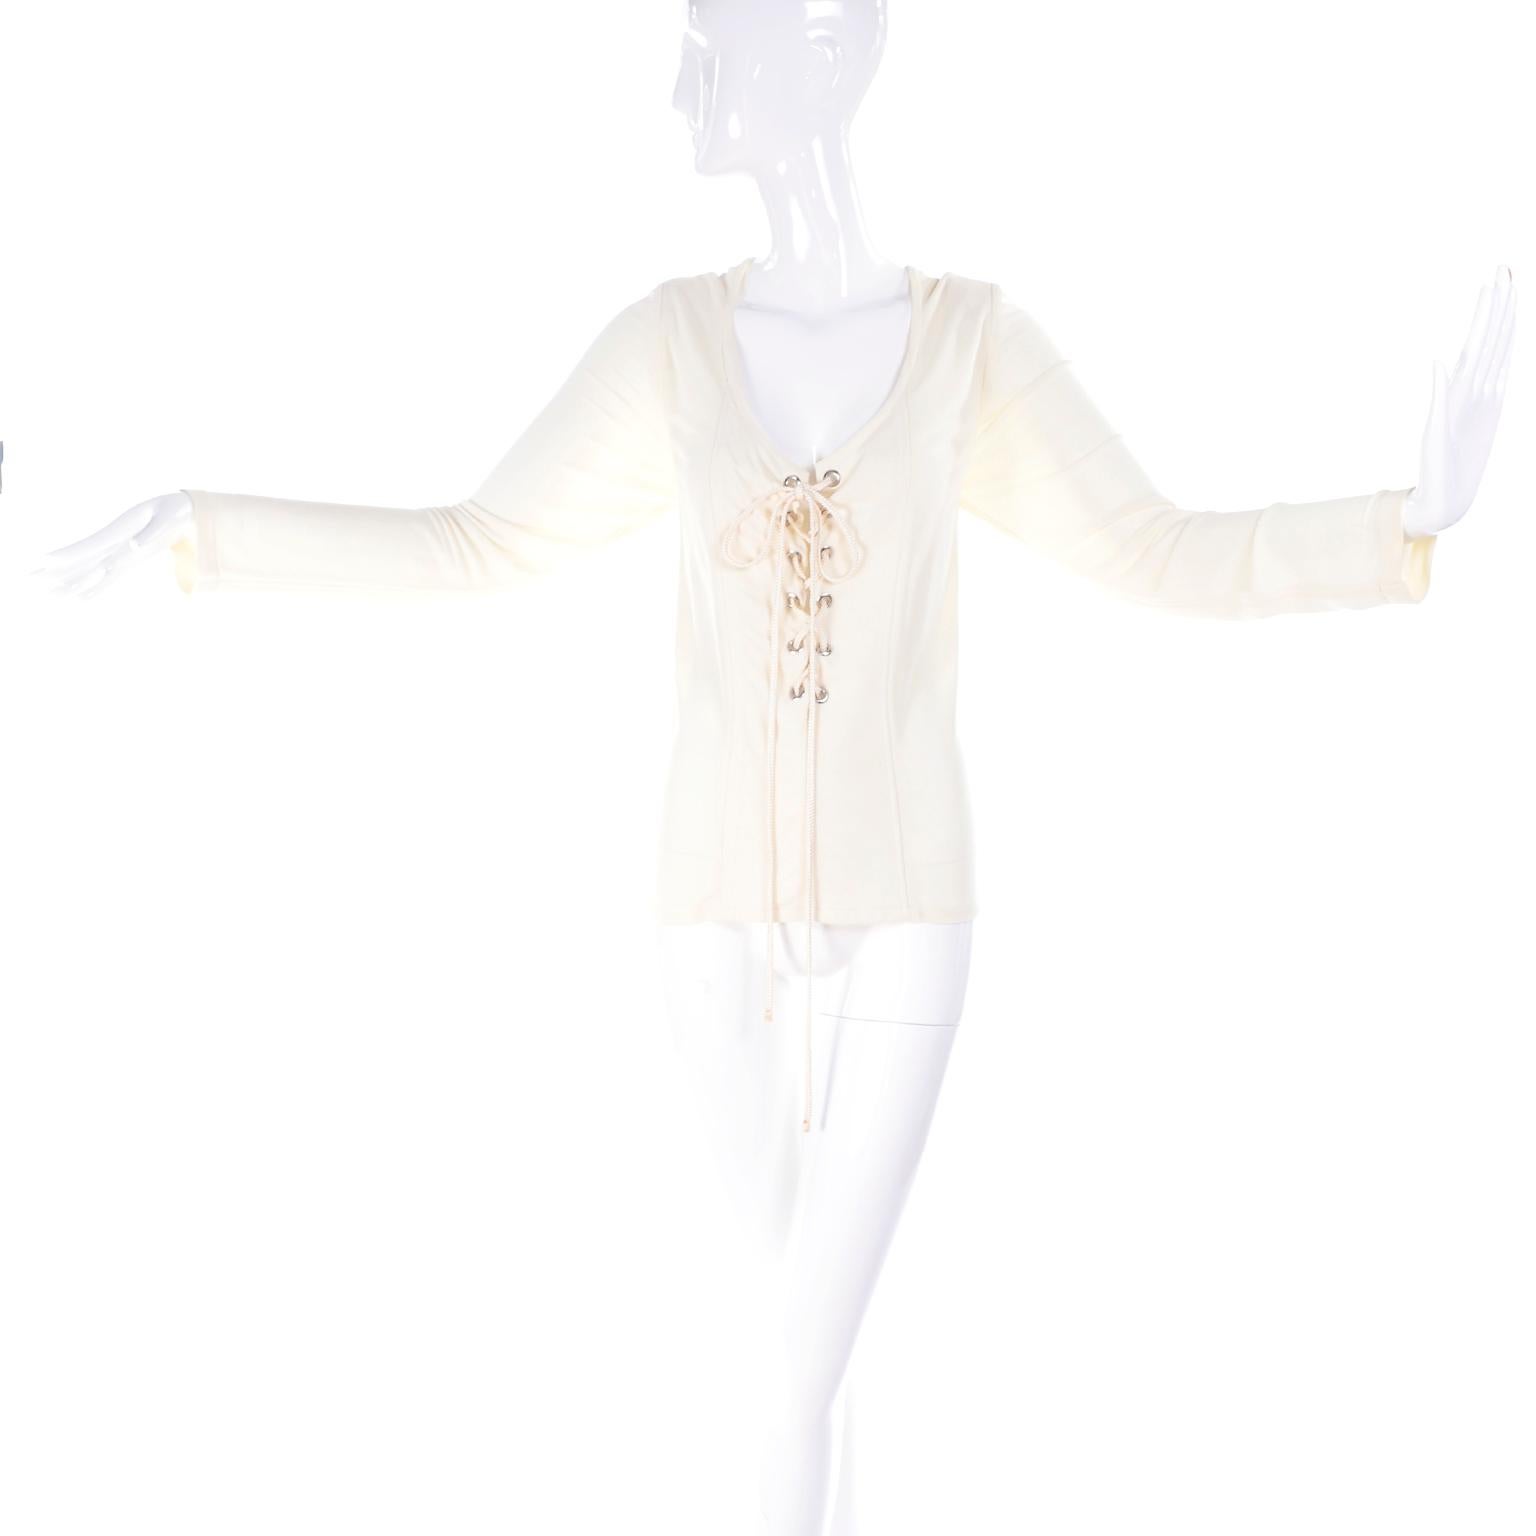 Yves Saint Laurent Top YSL Rive Gauche Lace Up Blouse in Cream Silk Jersey 42 2